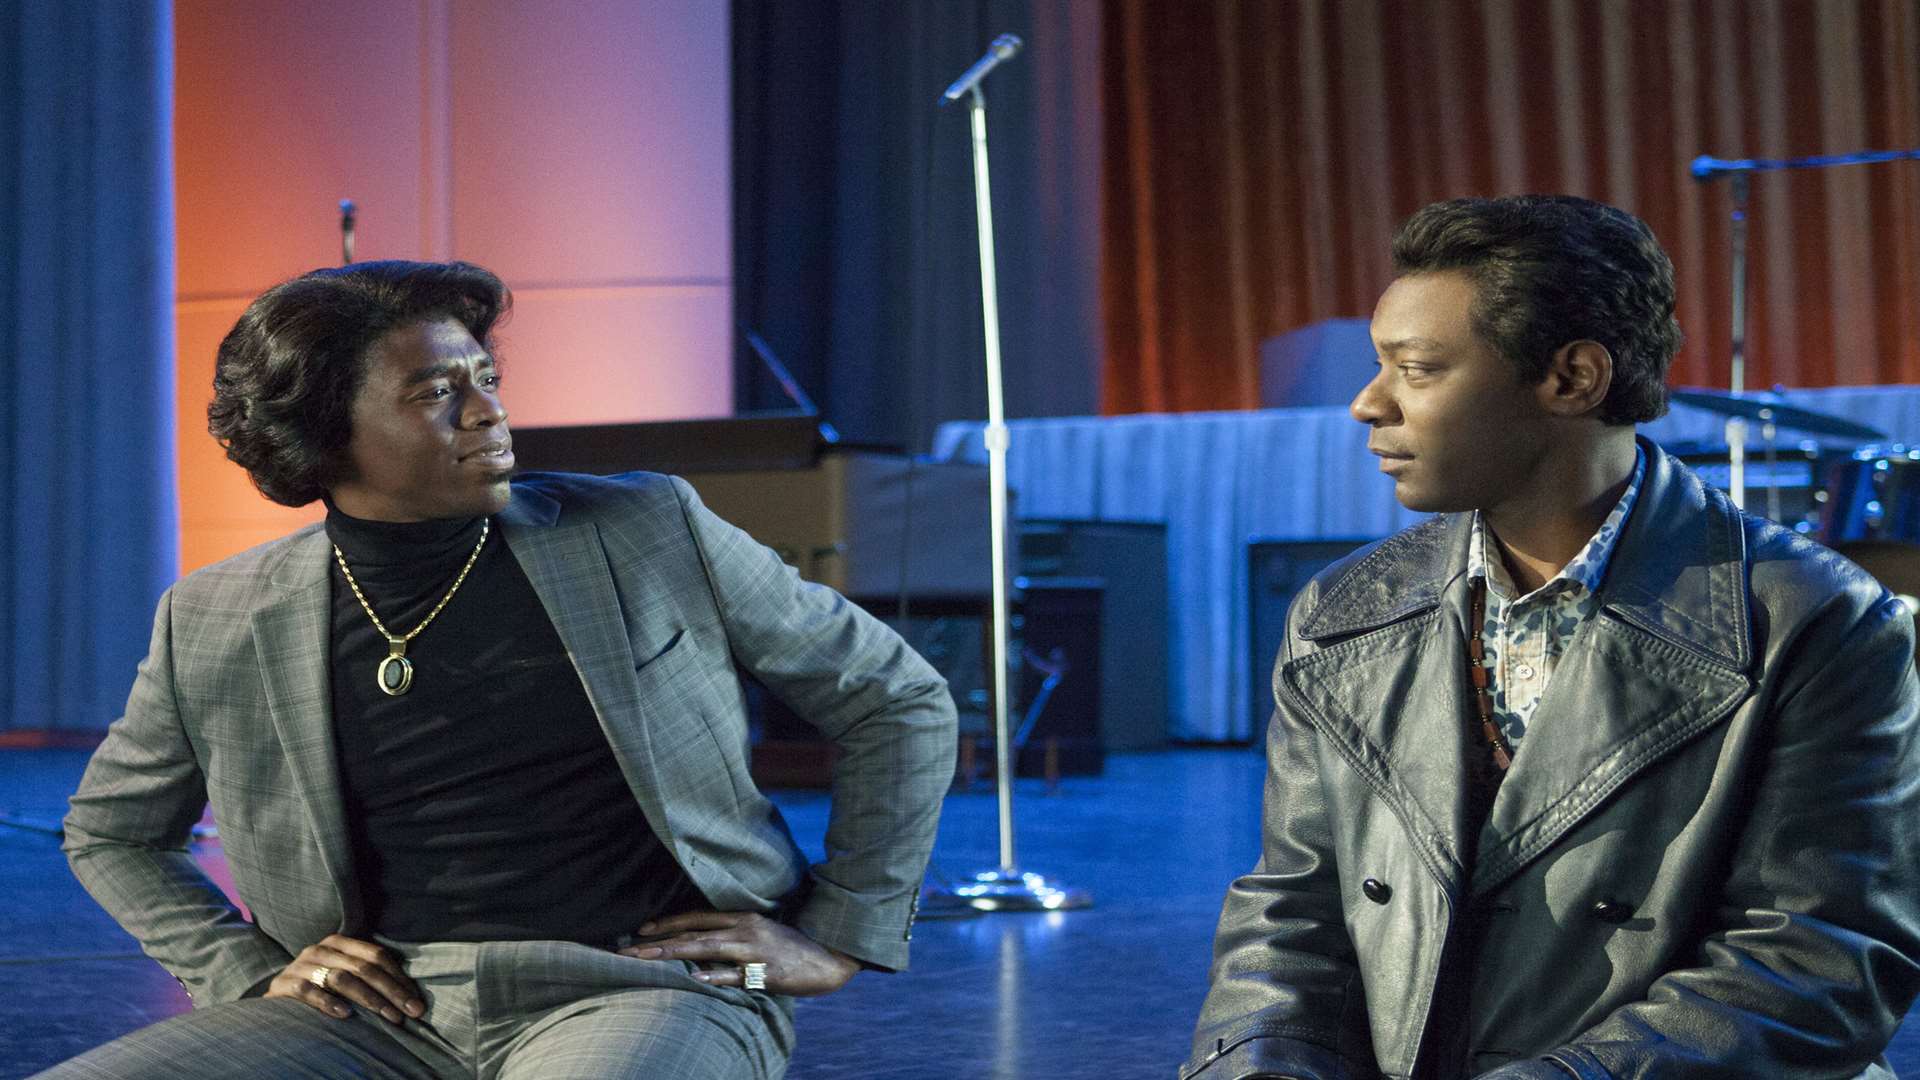 Get On Up, with Chadwick Boseman as James Brown and Nelsan Ellis as Bobby Byrd. Picture: PA Photo/Handout/Universal